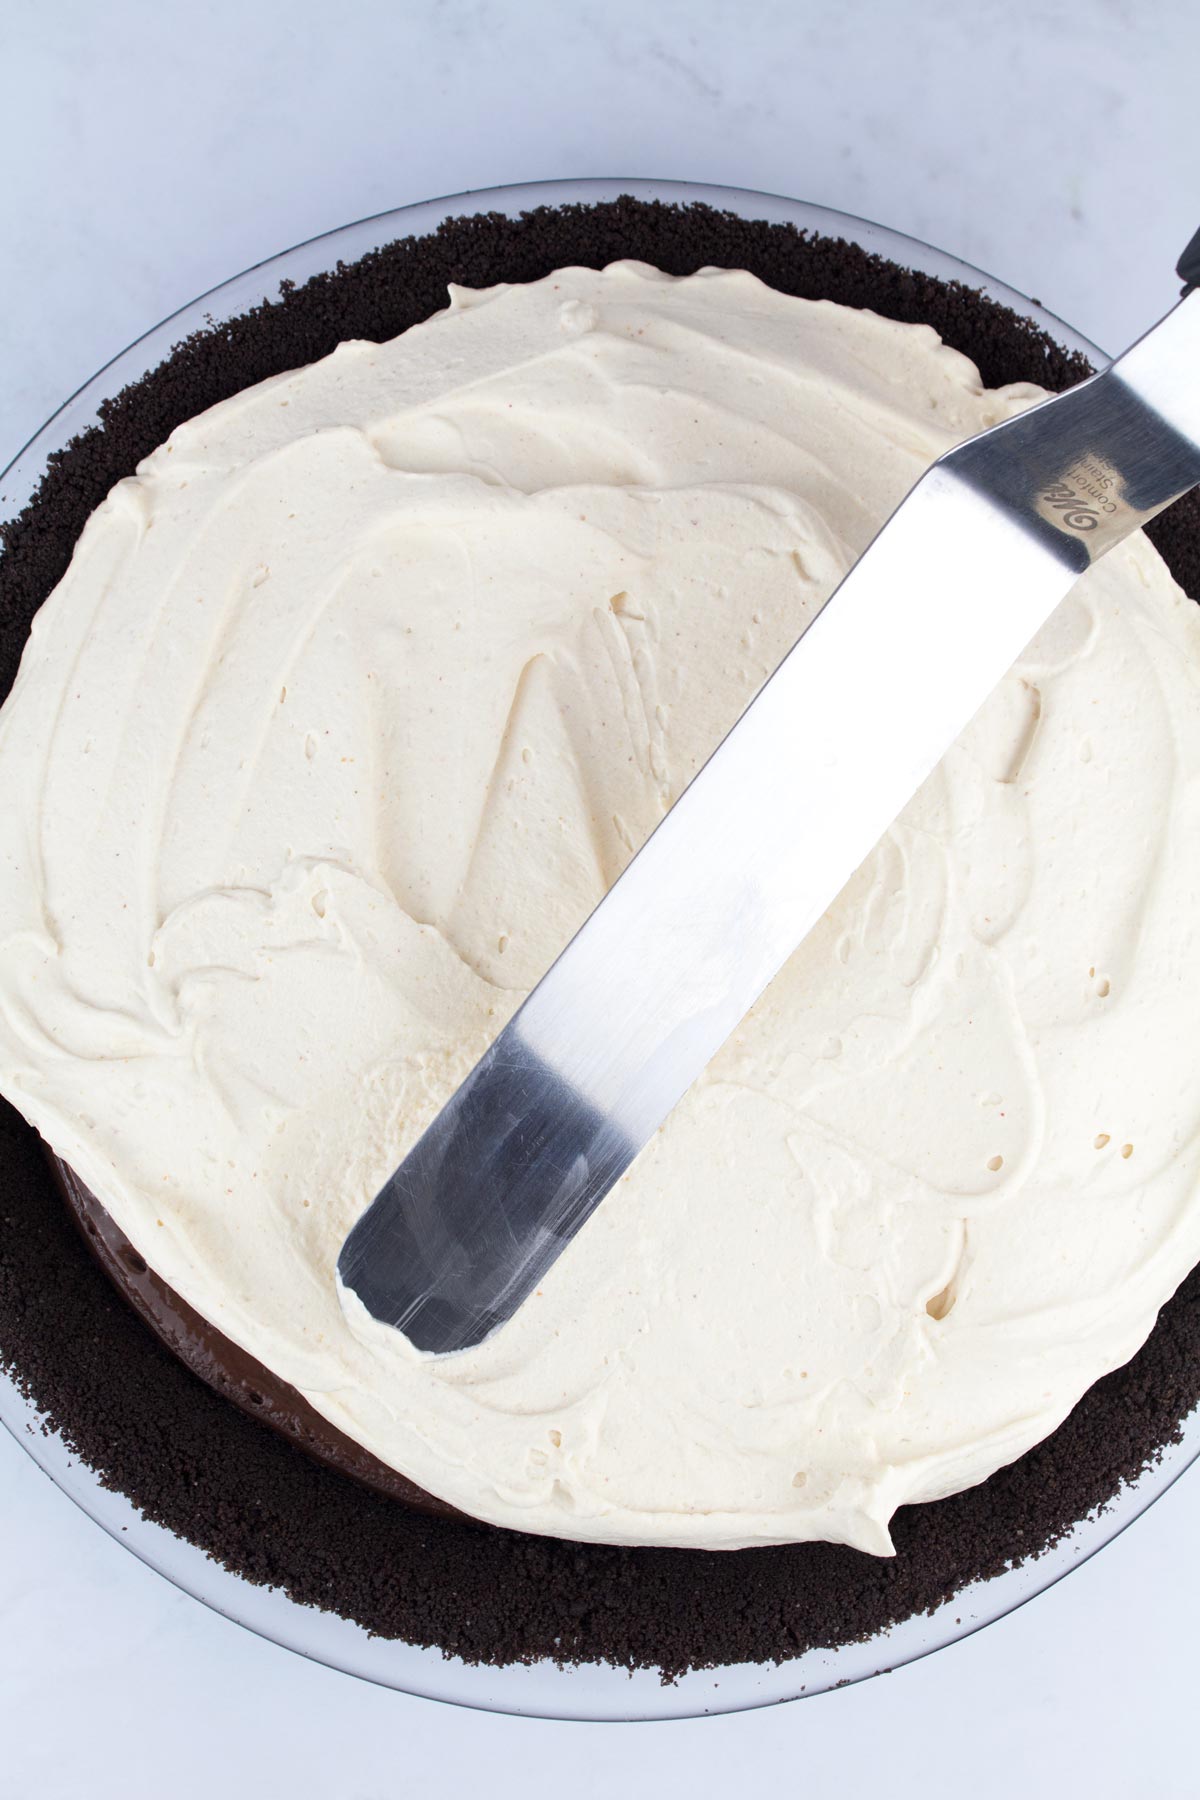 Spatula spreading peanut butter whipped cream over pie filling.